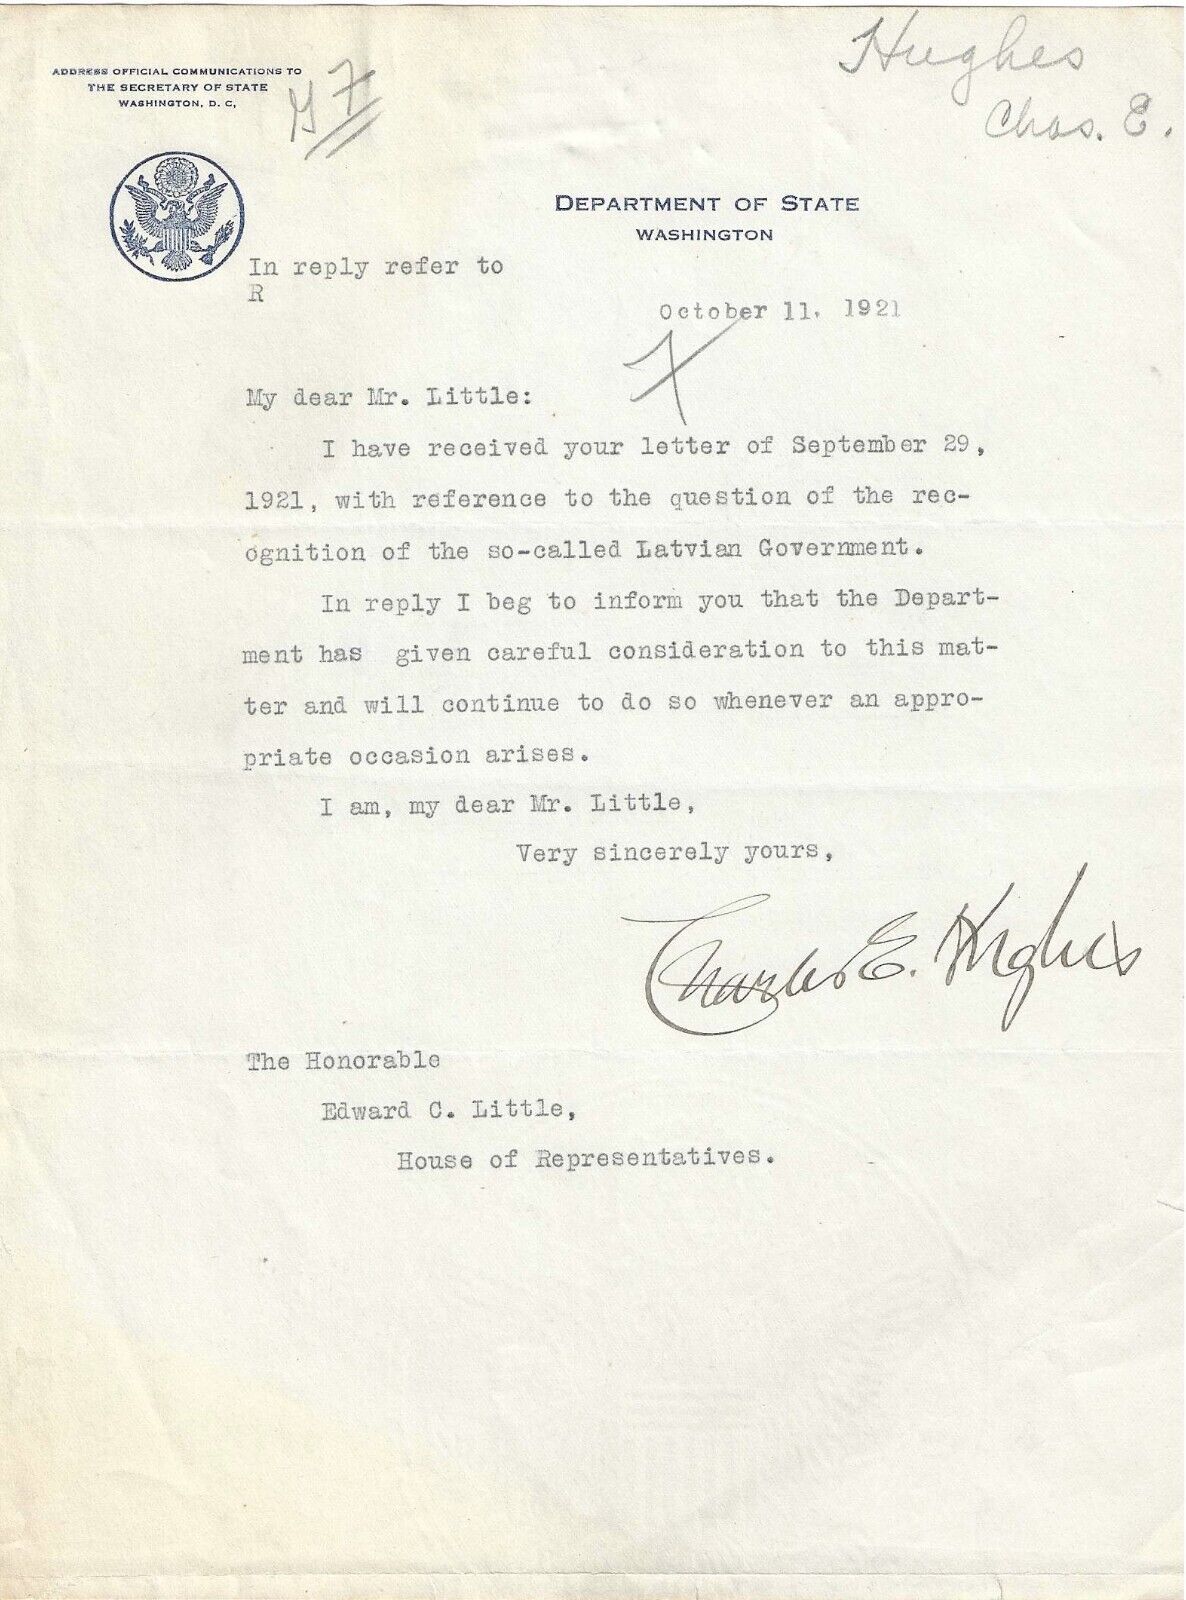 Secretary of State Hughes Agrees To Consider U.S. Position On Latvia In 1921